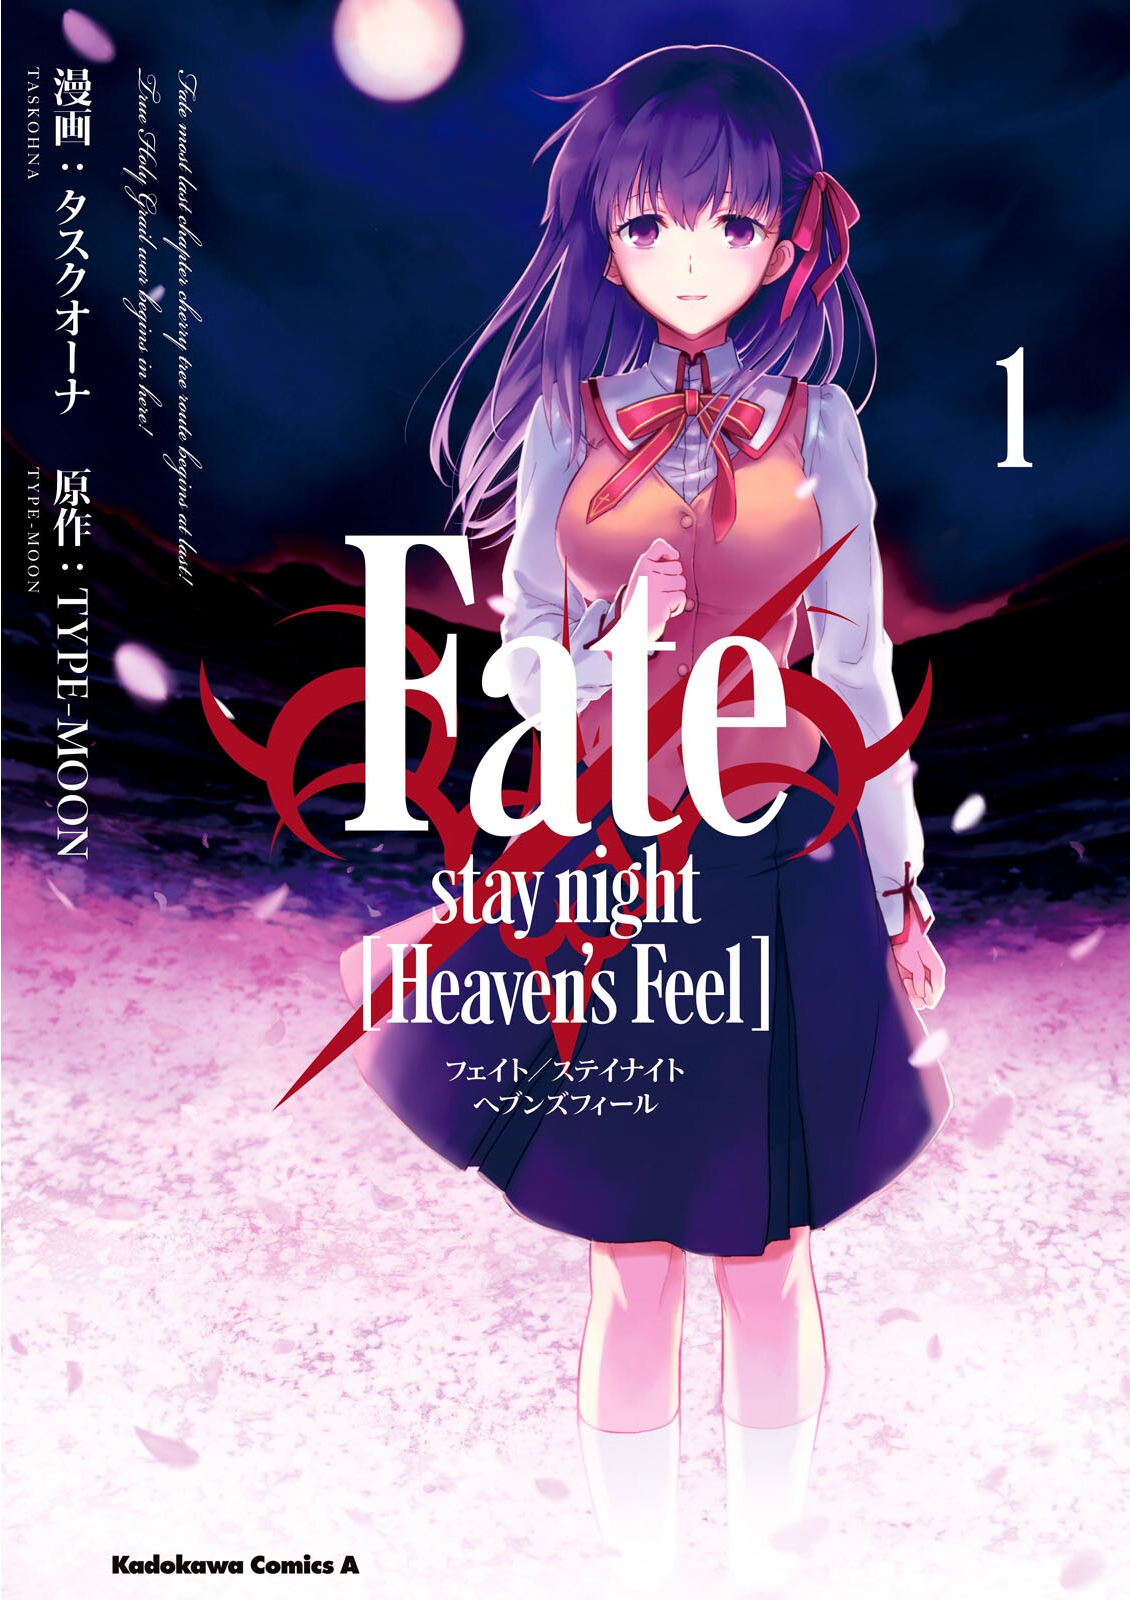 Fate anime series: Complete watch order, explained